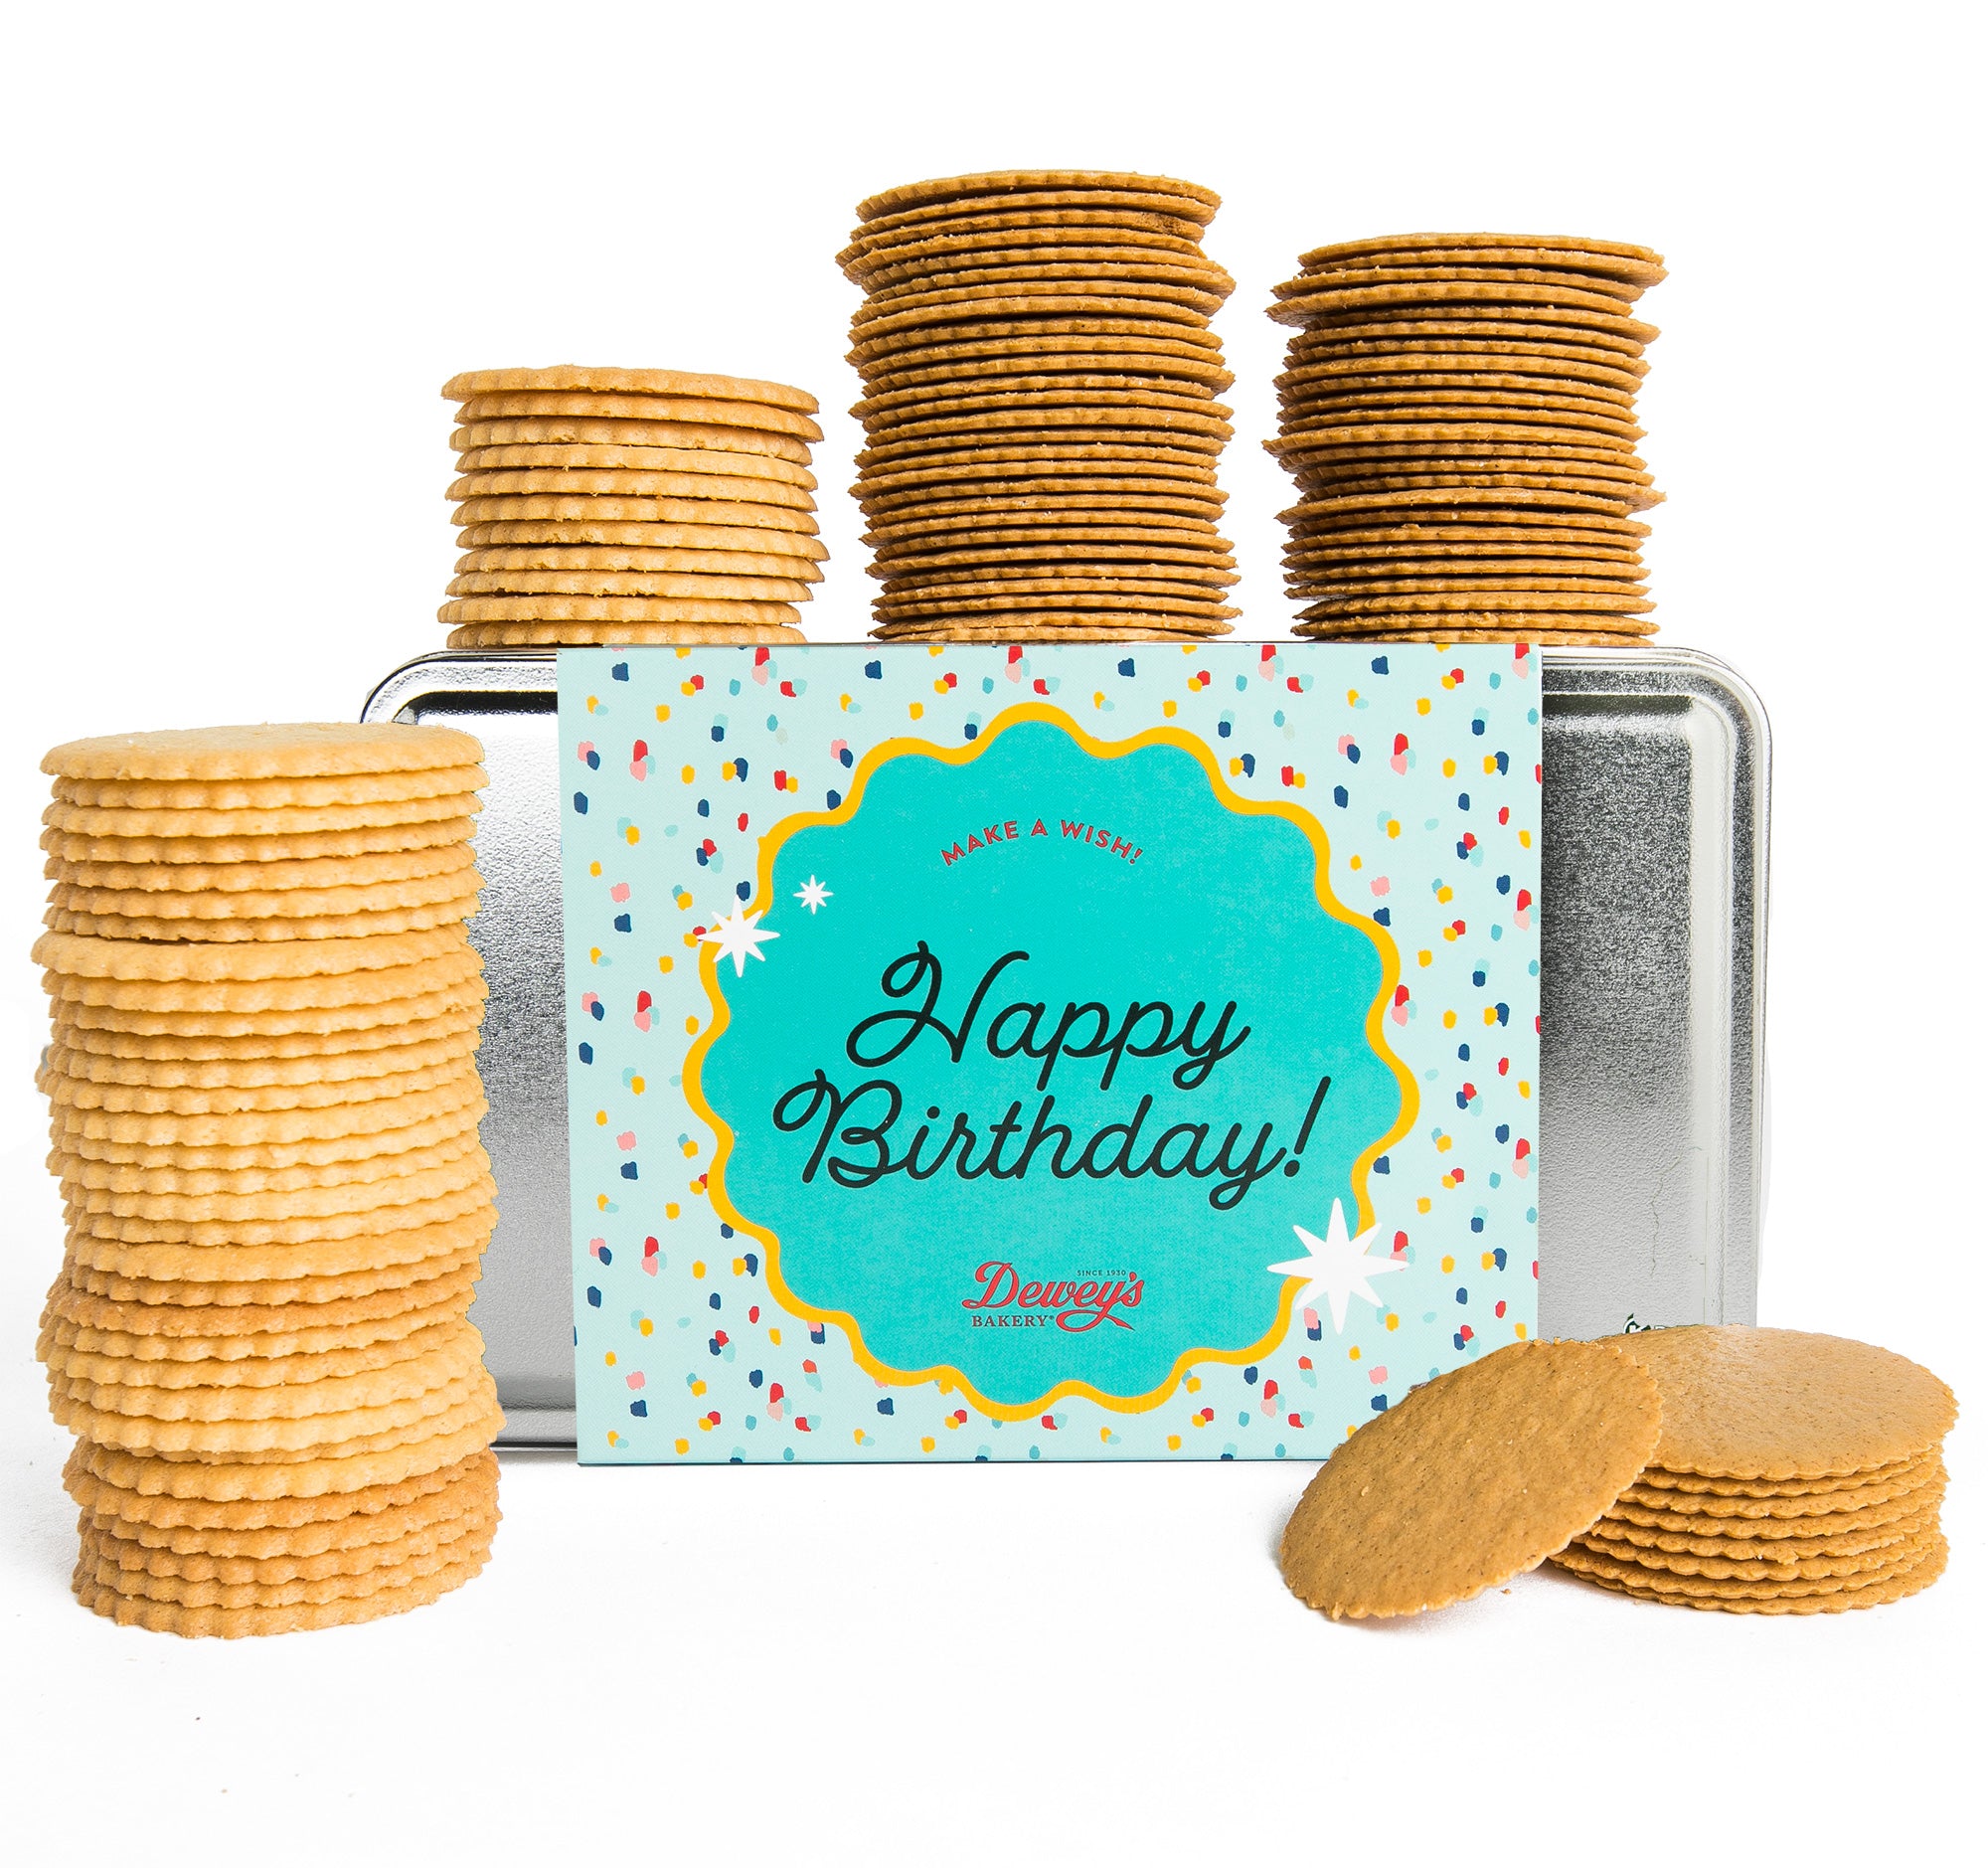 "Happy Birthday" Sugar & Ginger Spice Moravian Cookie Gift Tin